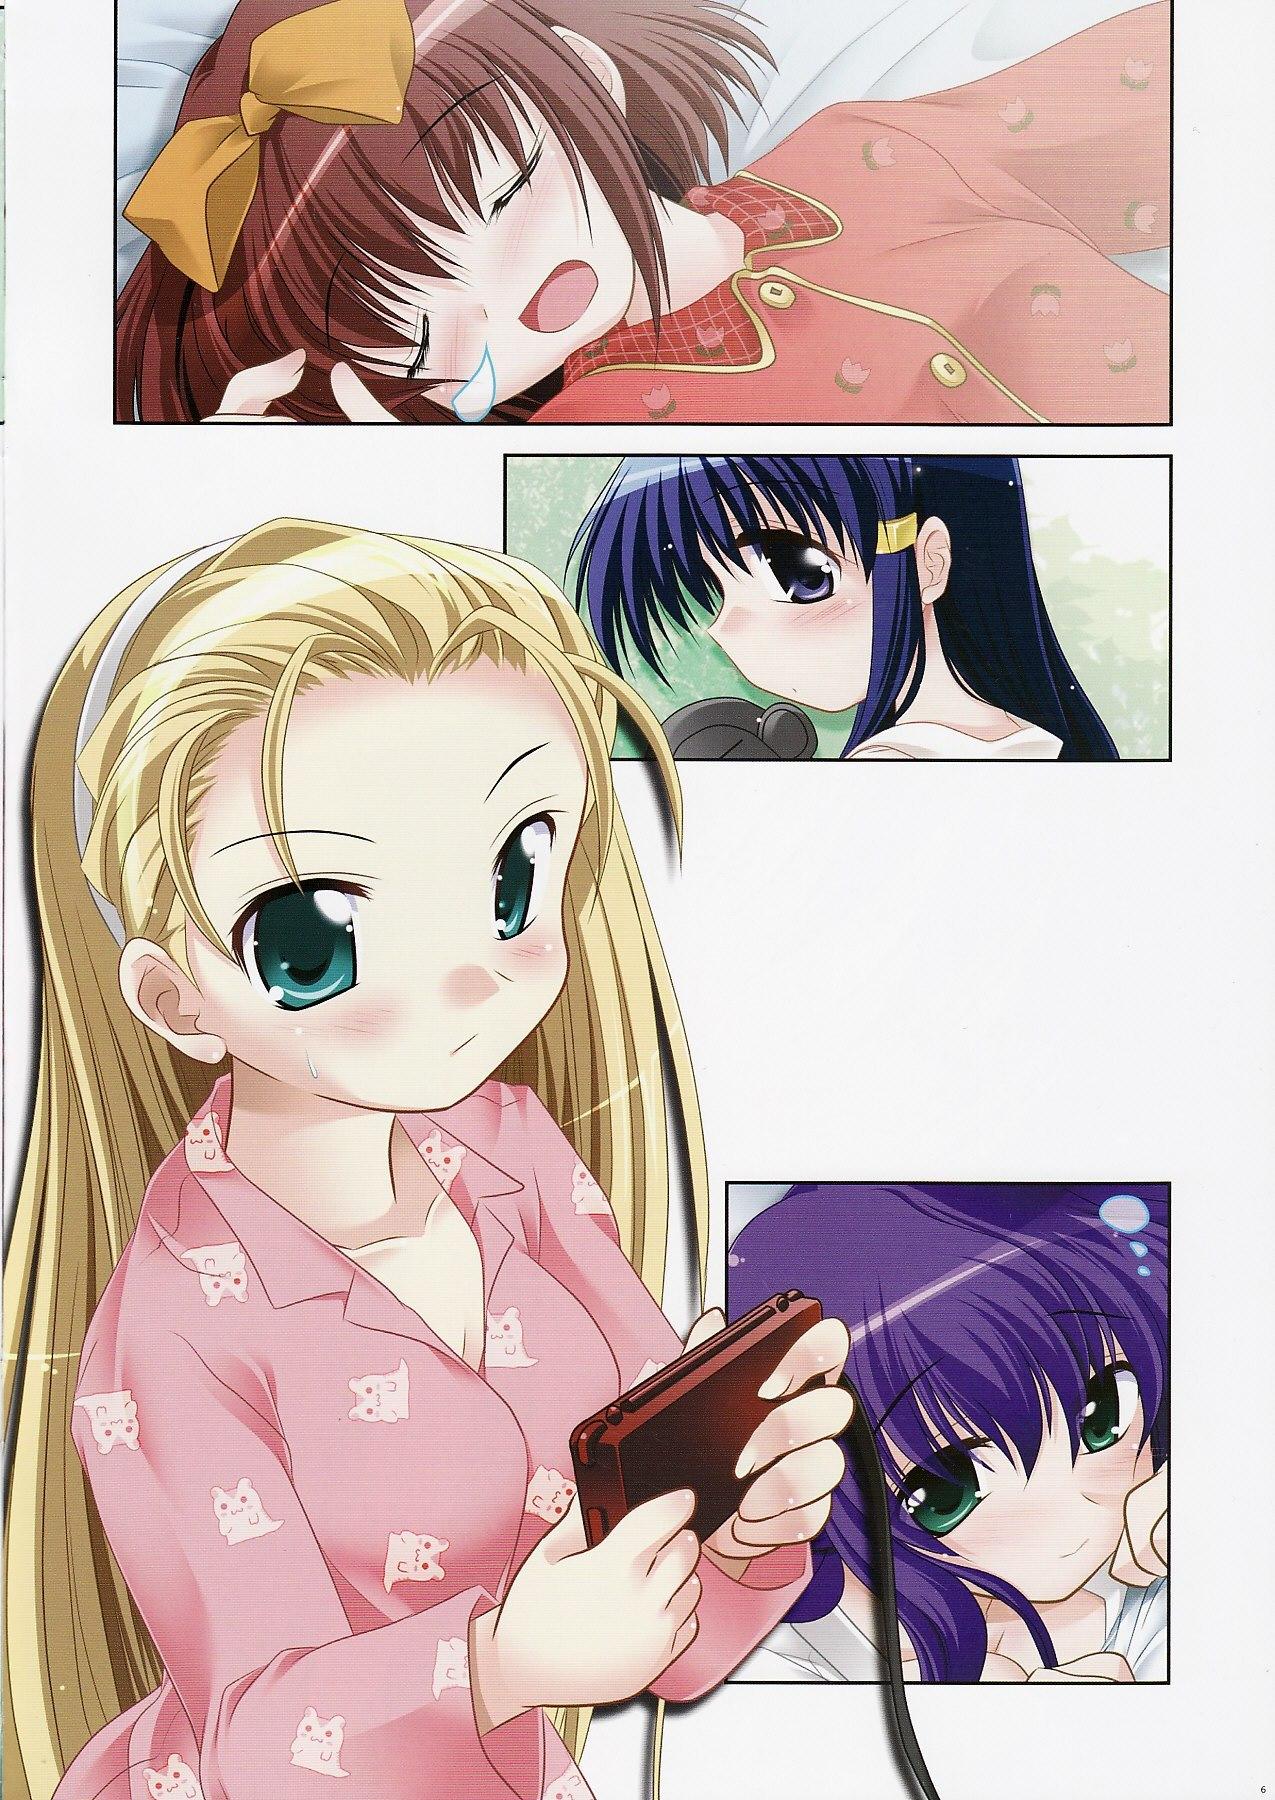 Assfingering Purimo#4 - Kanon Clannad Little busters 4some - Page 7